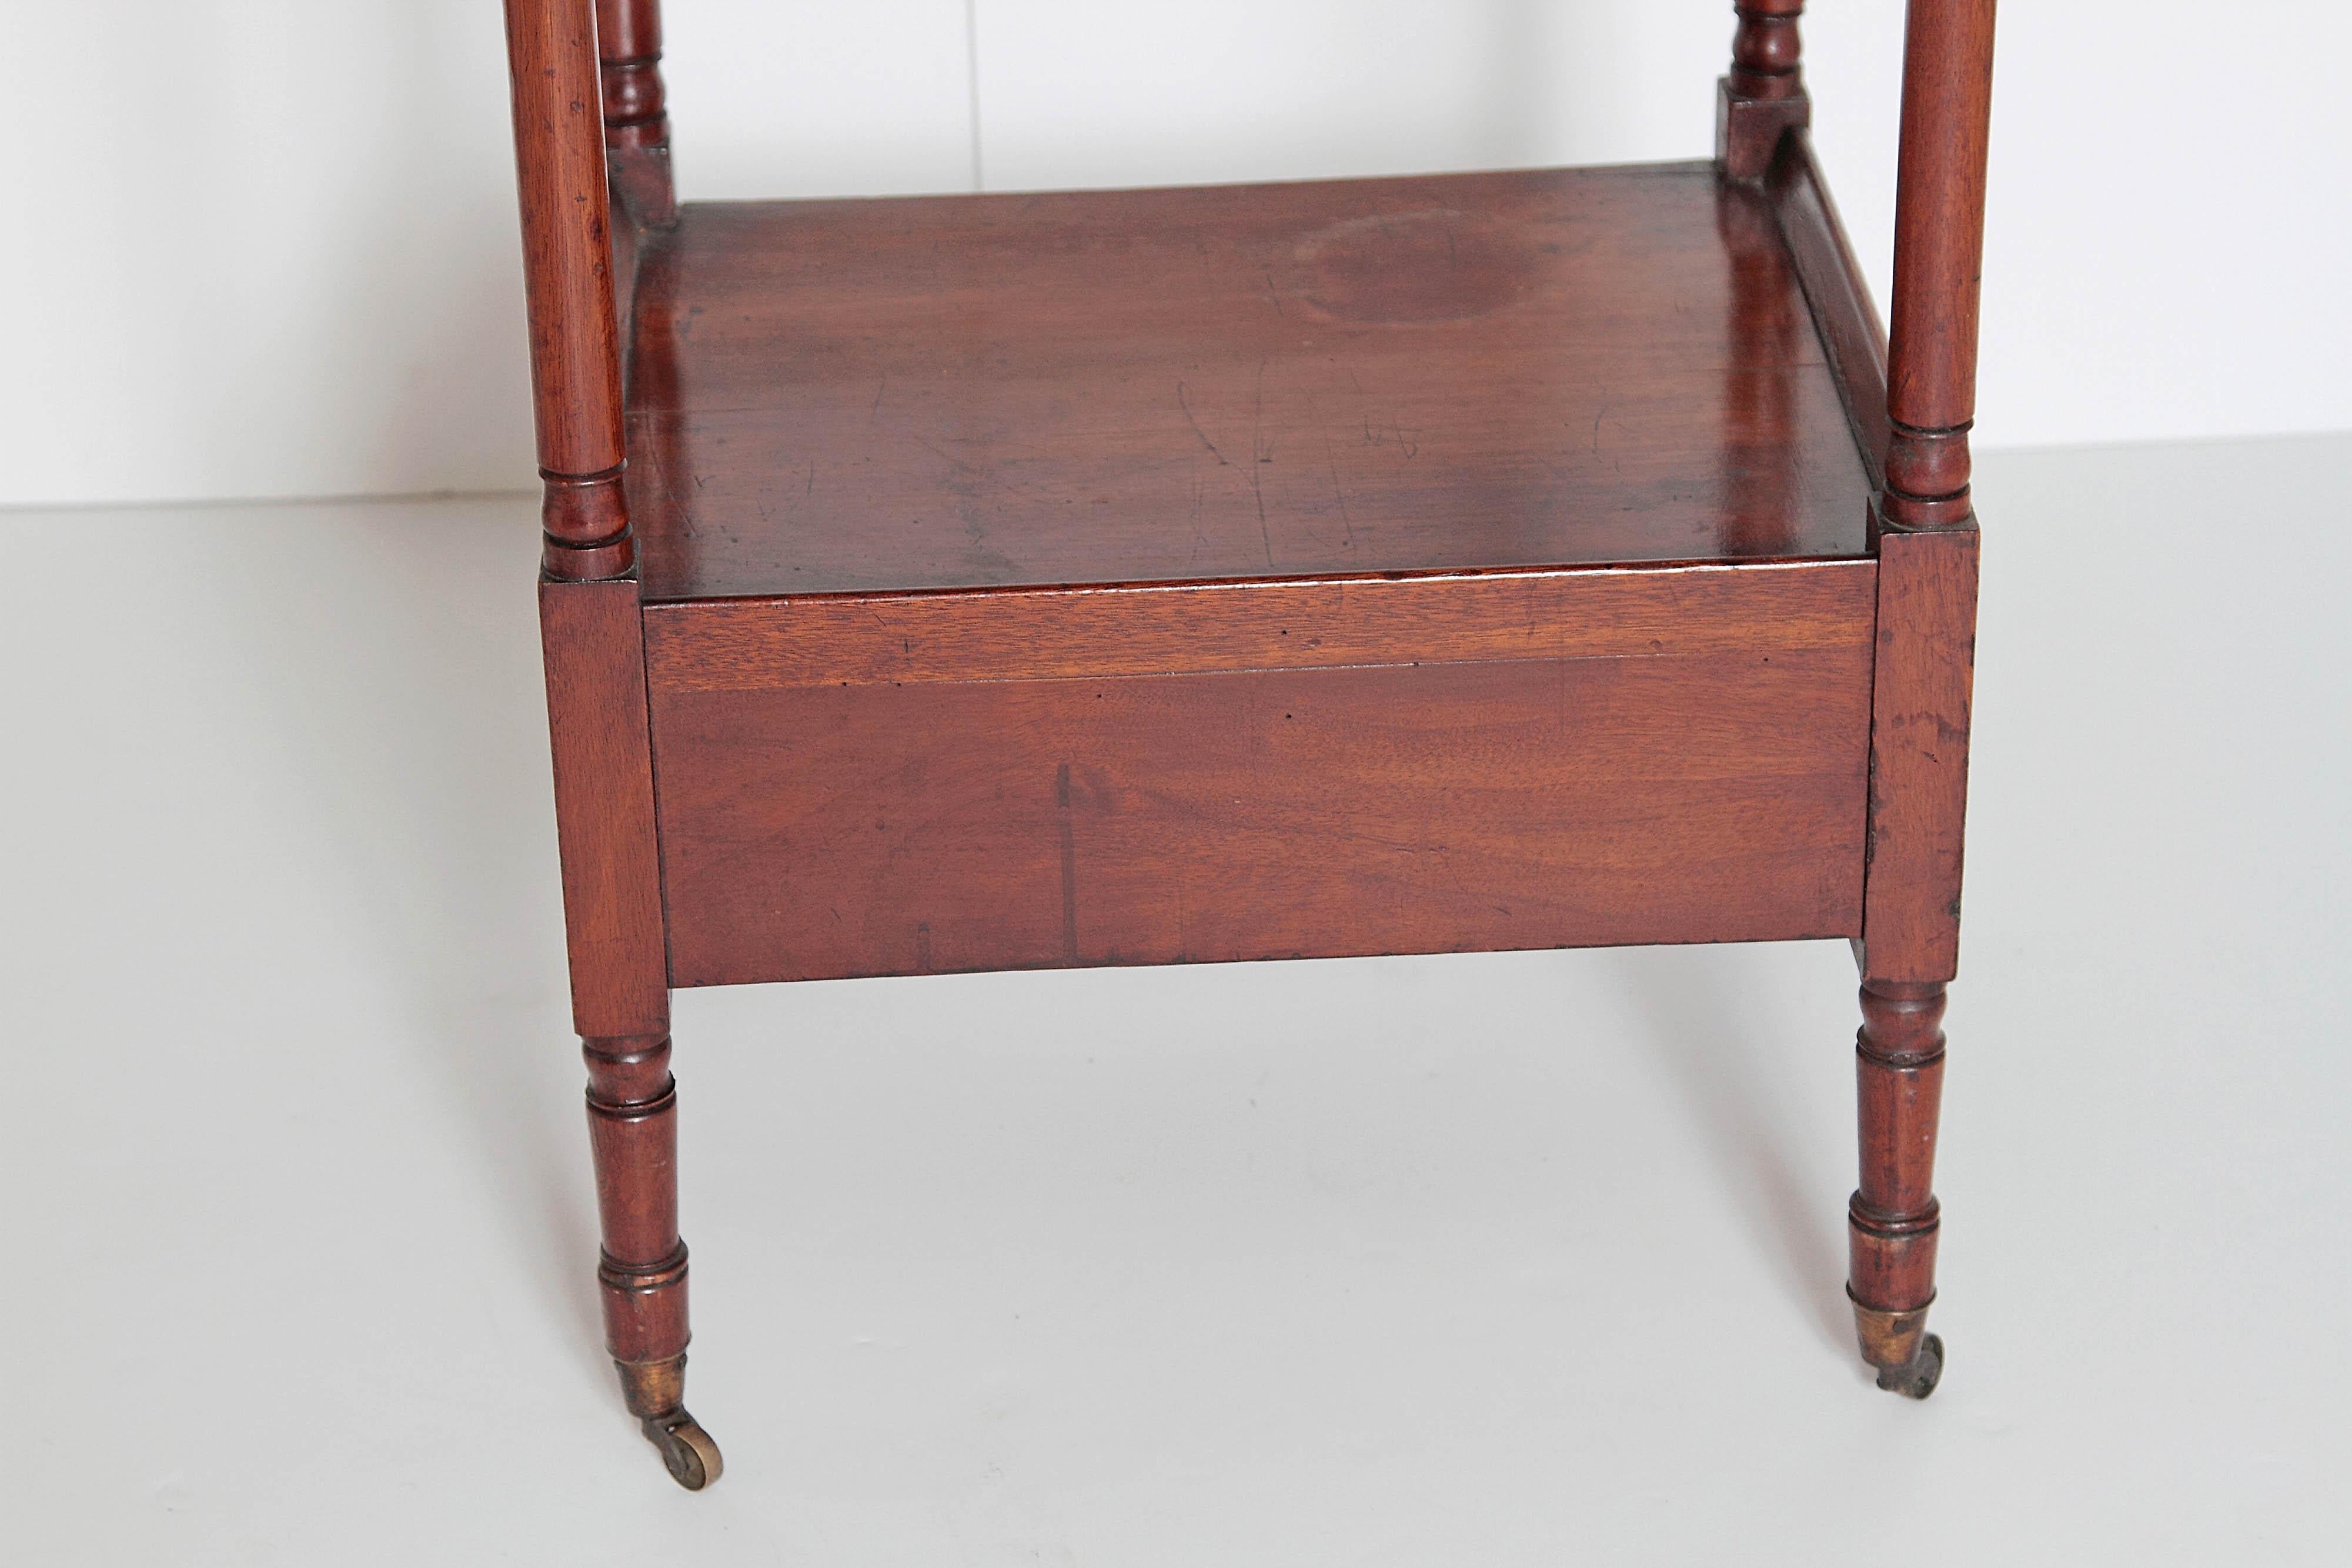 19th Century George III Four-Tier Mahogany Whatnot with Drawer